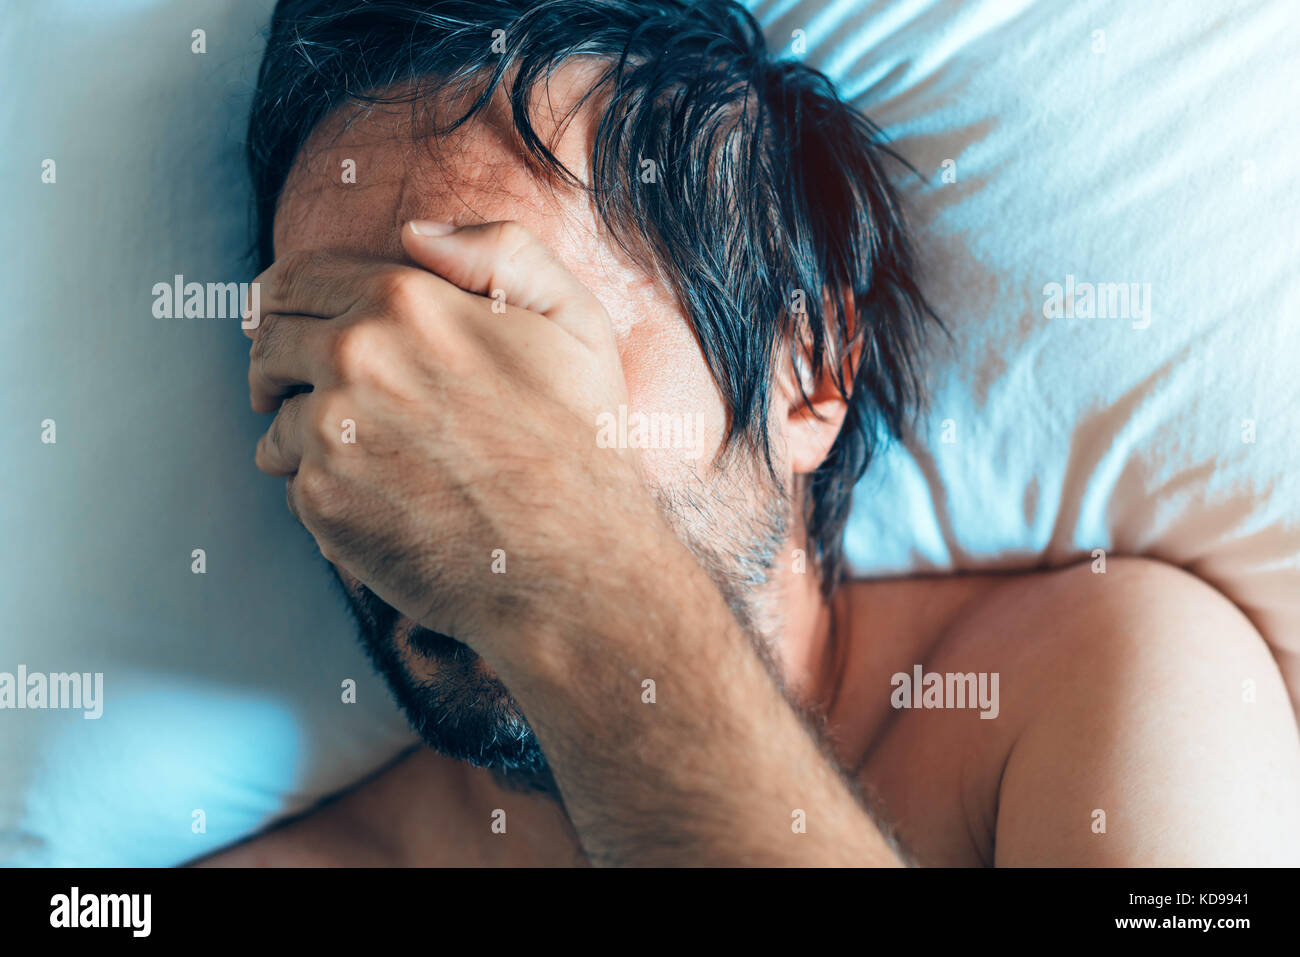 Morning depression and midlife crisis of a man in his 40s lying in bed in morning with symptoms like extreme sadness, frustration, anger and fatigue. Stock Photo